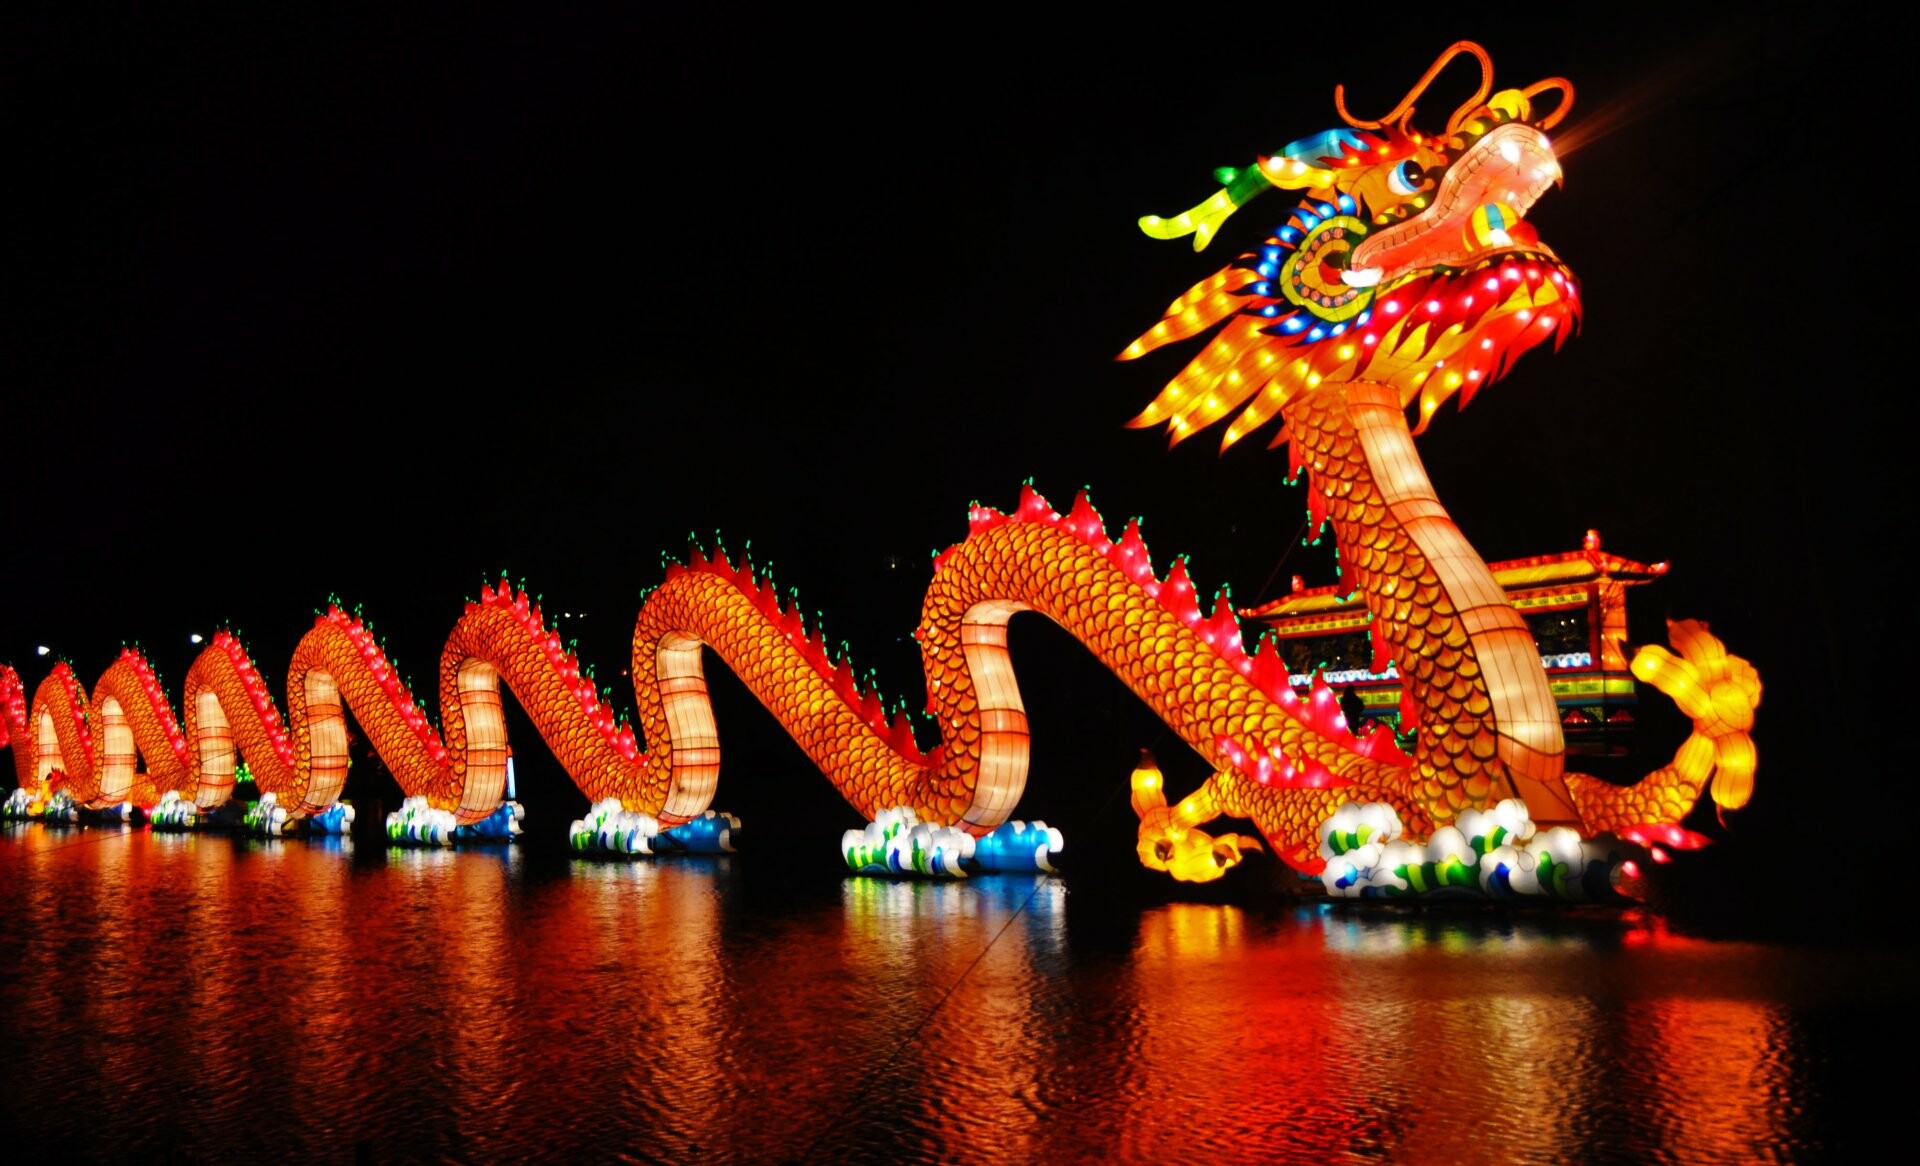 China: Dragon, A legendary creature in Chinese mythology, New Year. 1920x1170 HD Wallpaper.